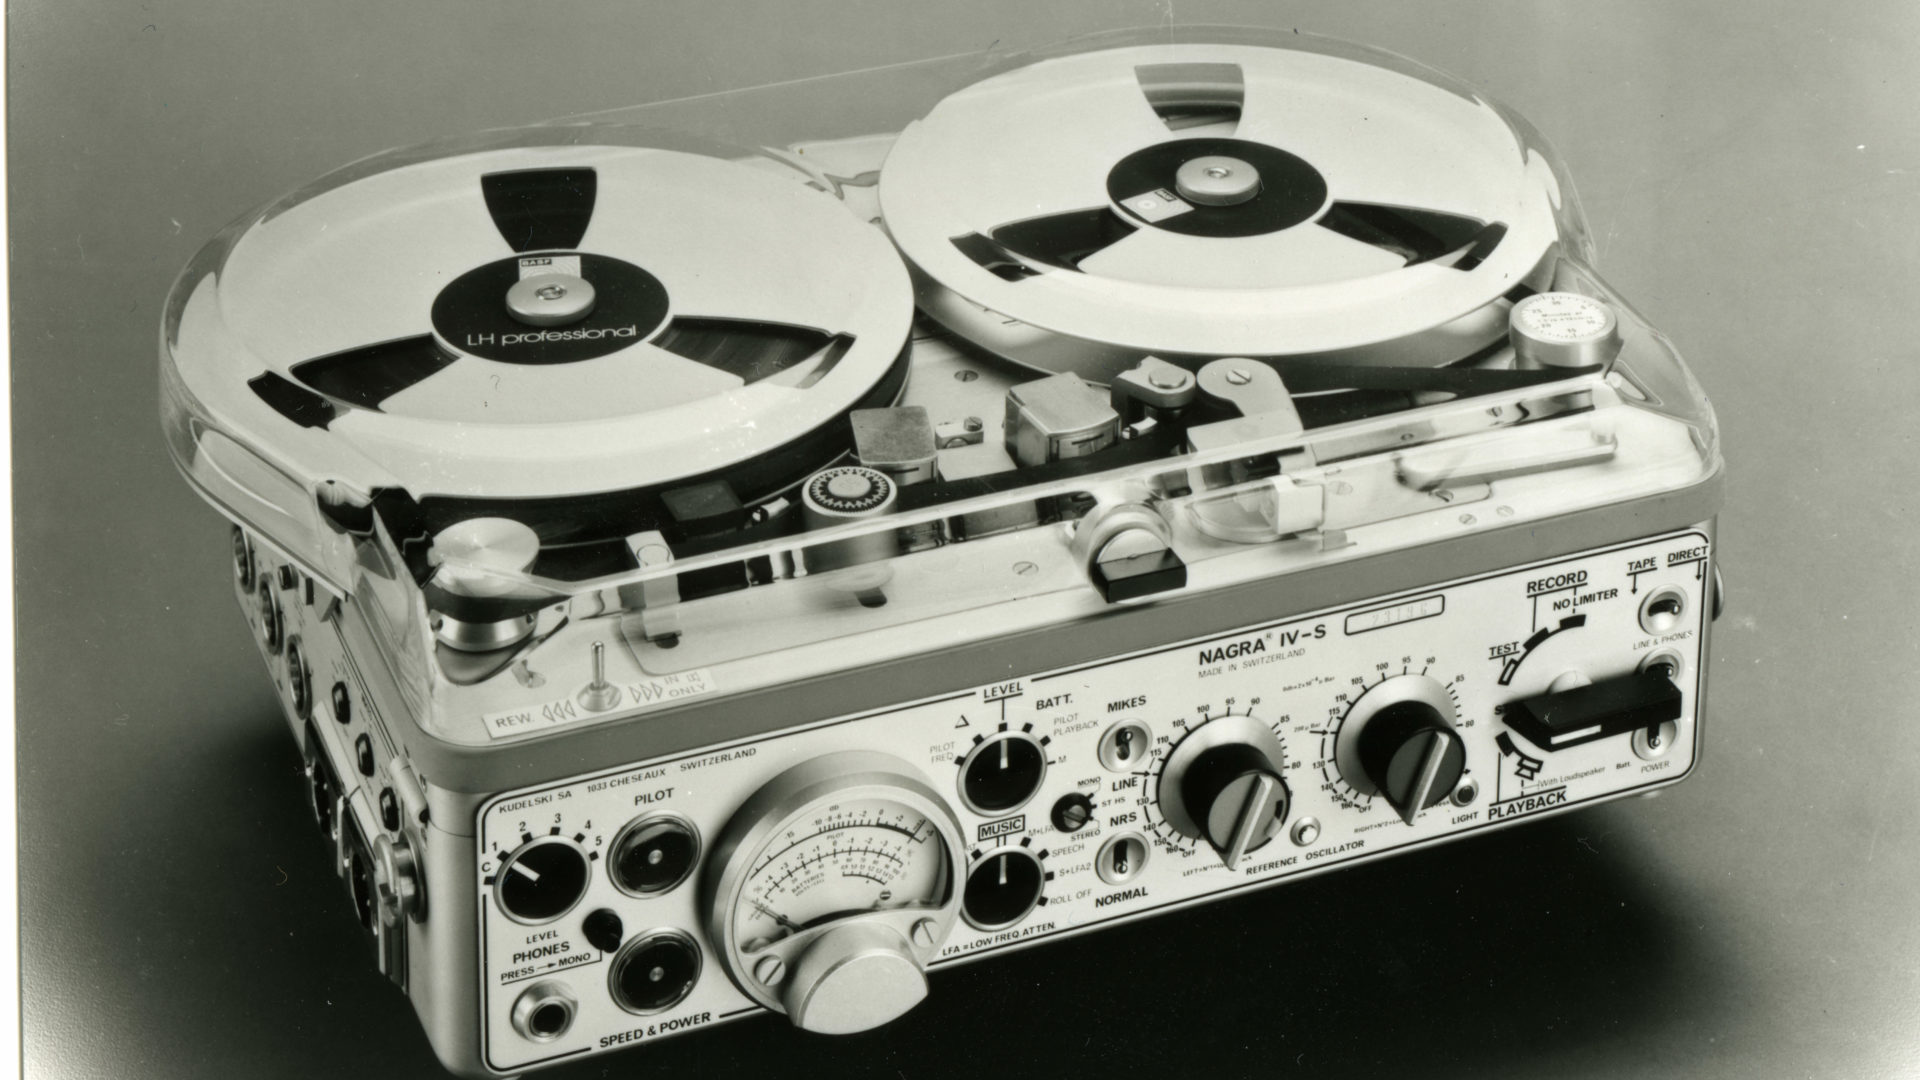 Do pro musicians use reel-to-reel tape recorders? - Quora